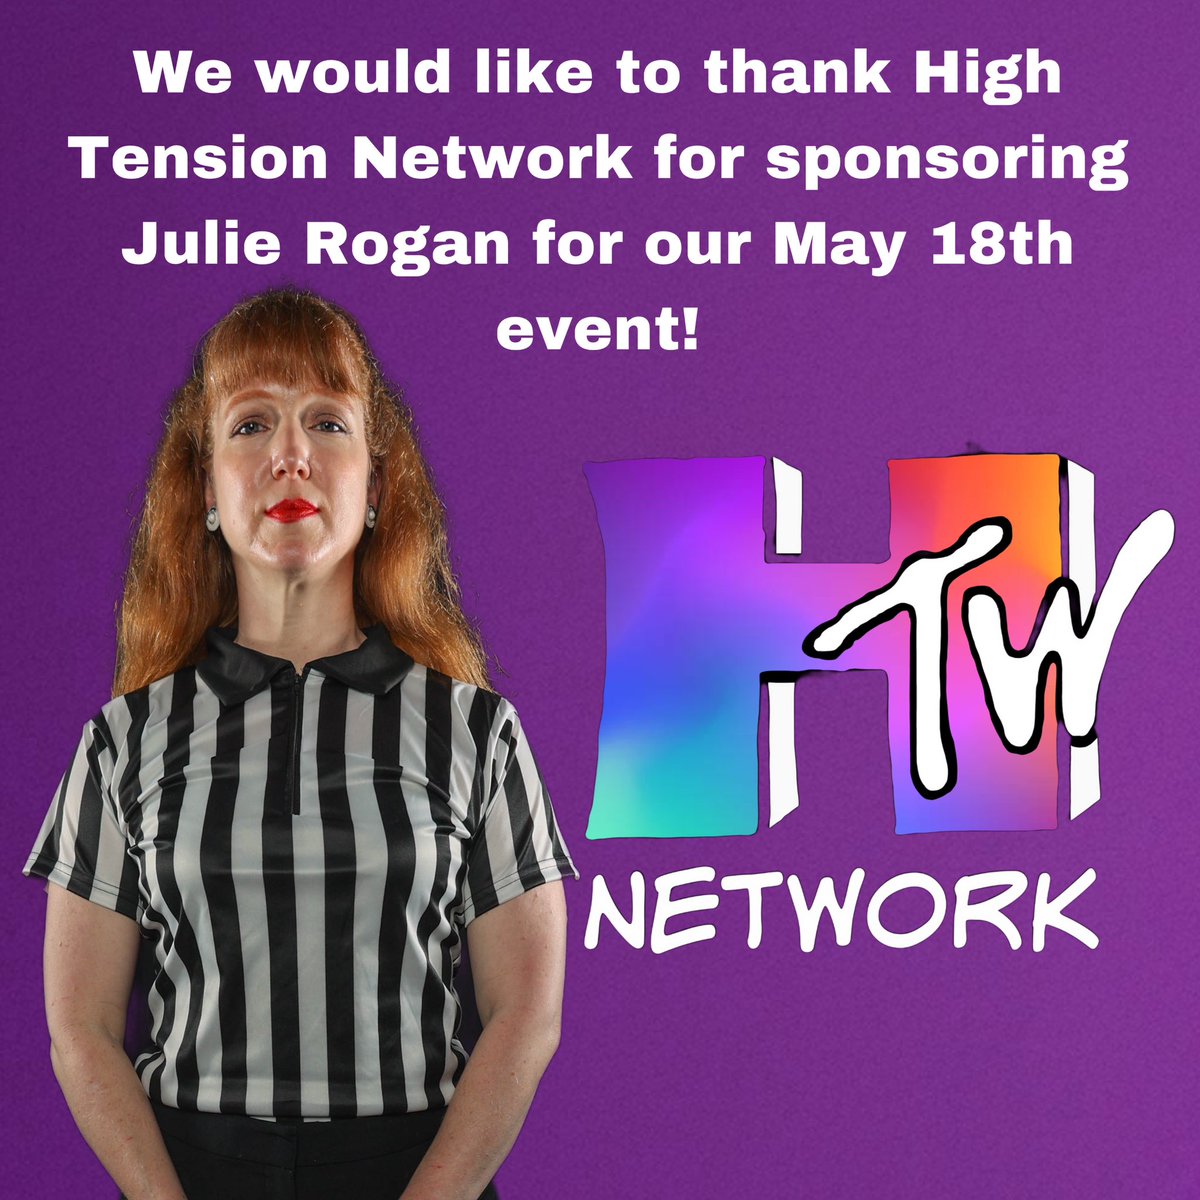 Thank you to High Tension Network for sponsoring Julie Rogan for our May 18th show Ding Dong! @JulieRoganCNS